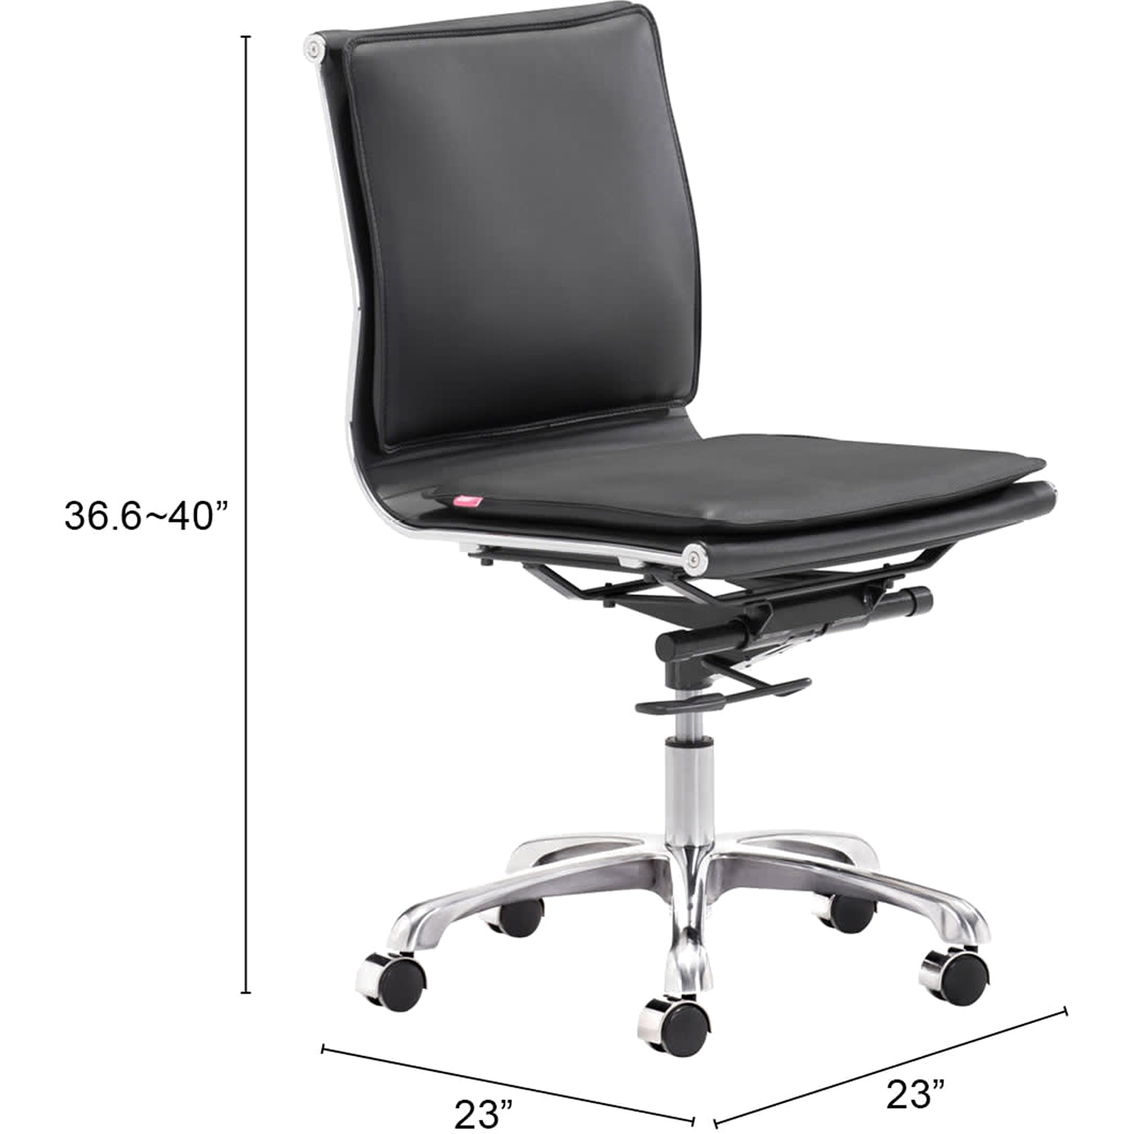 Zuo Lider Plus Armless Office Chair - Image 5 of 7